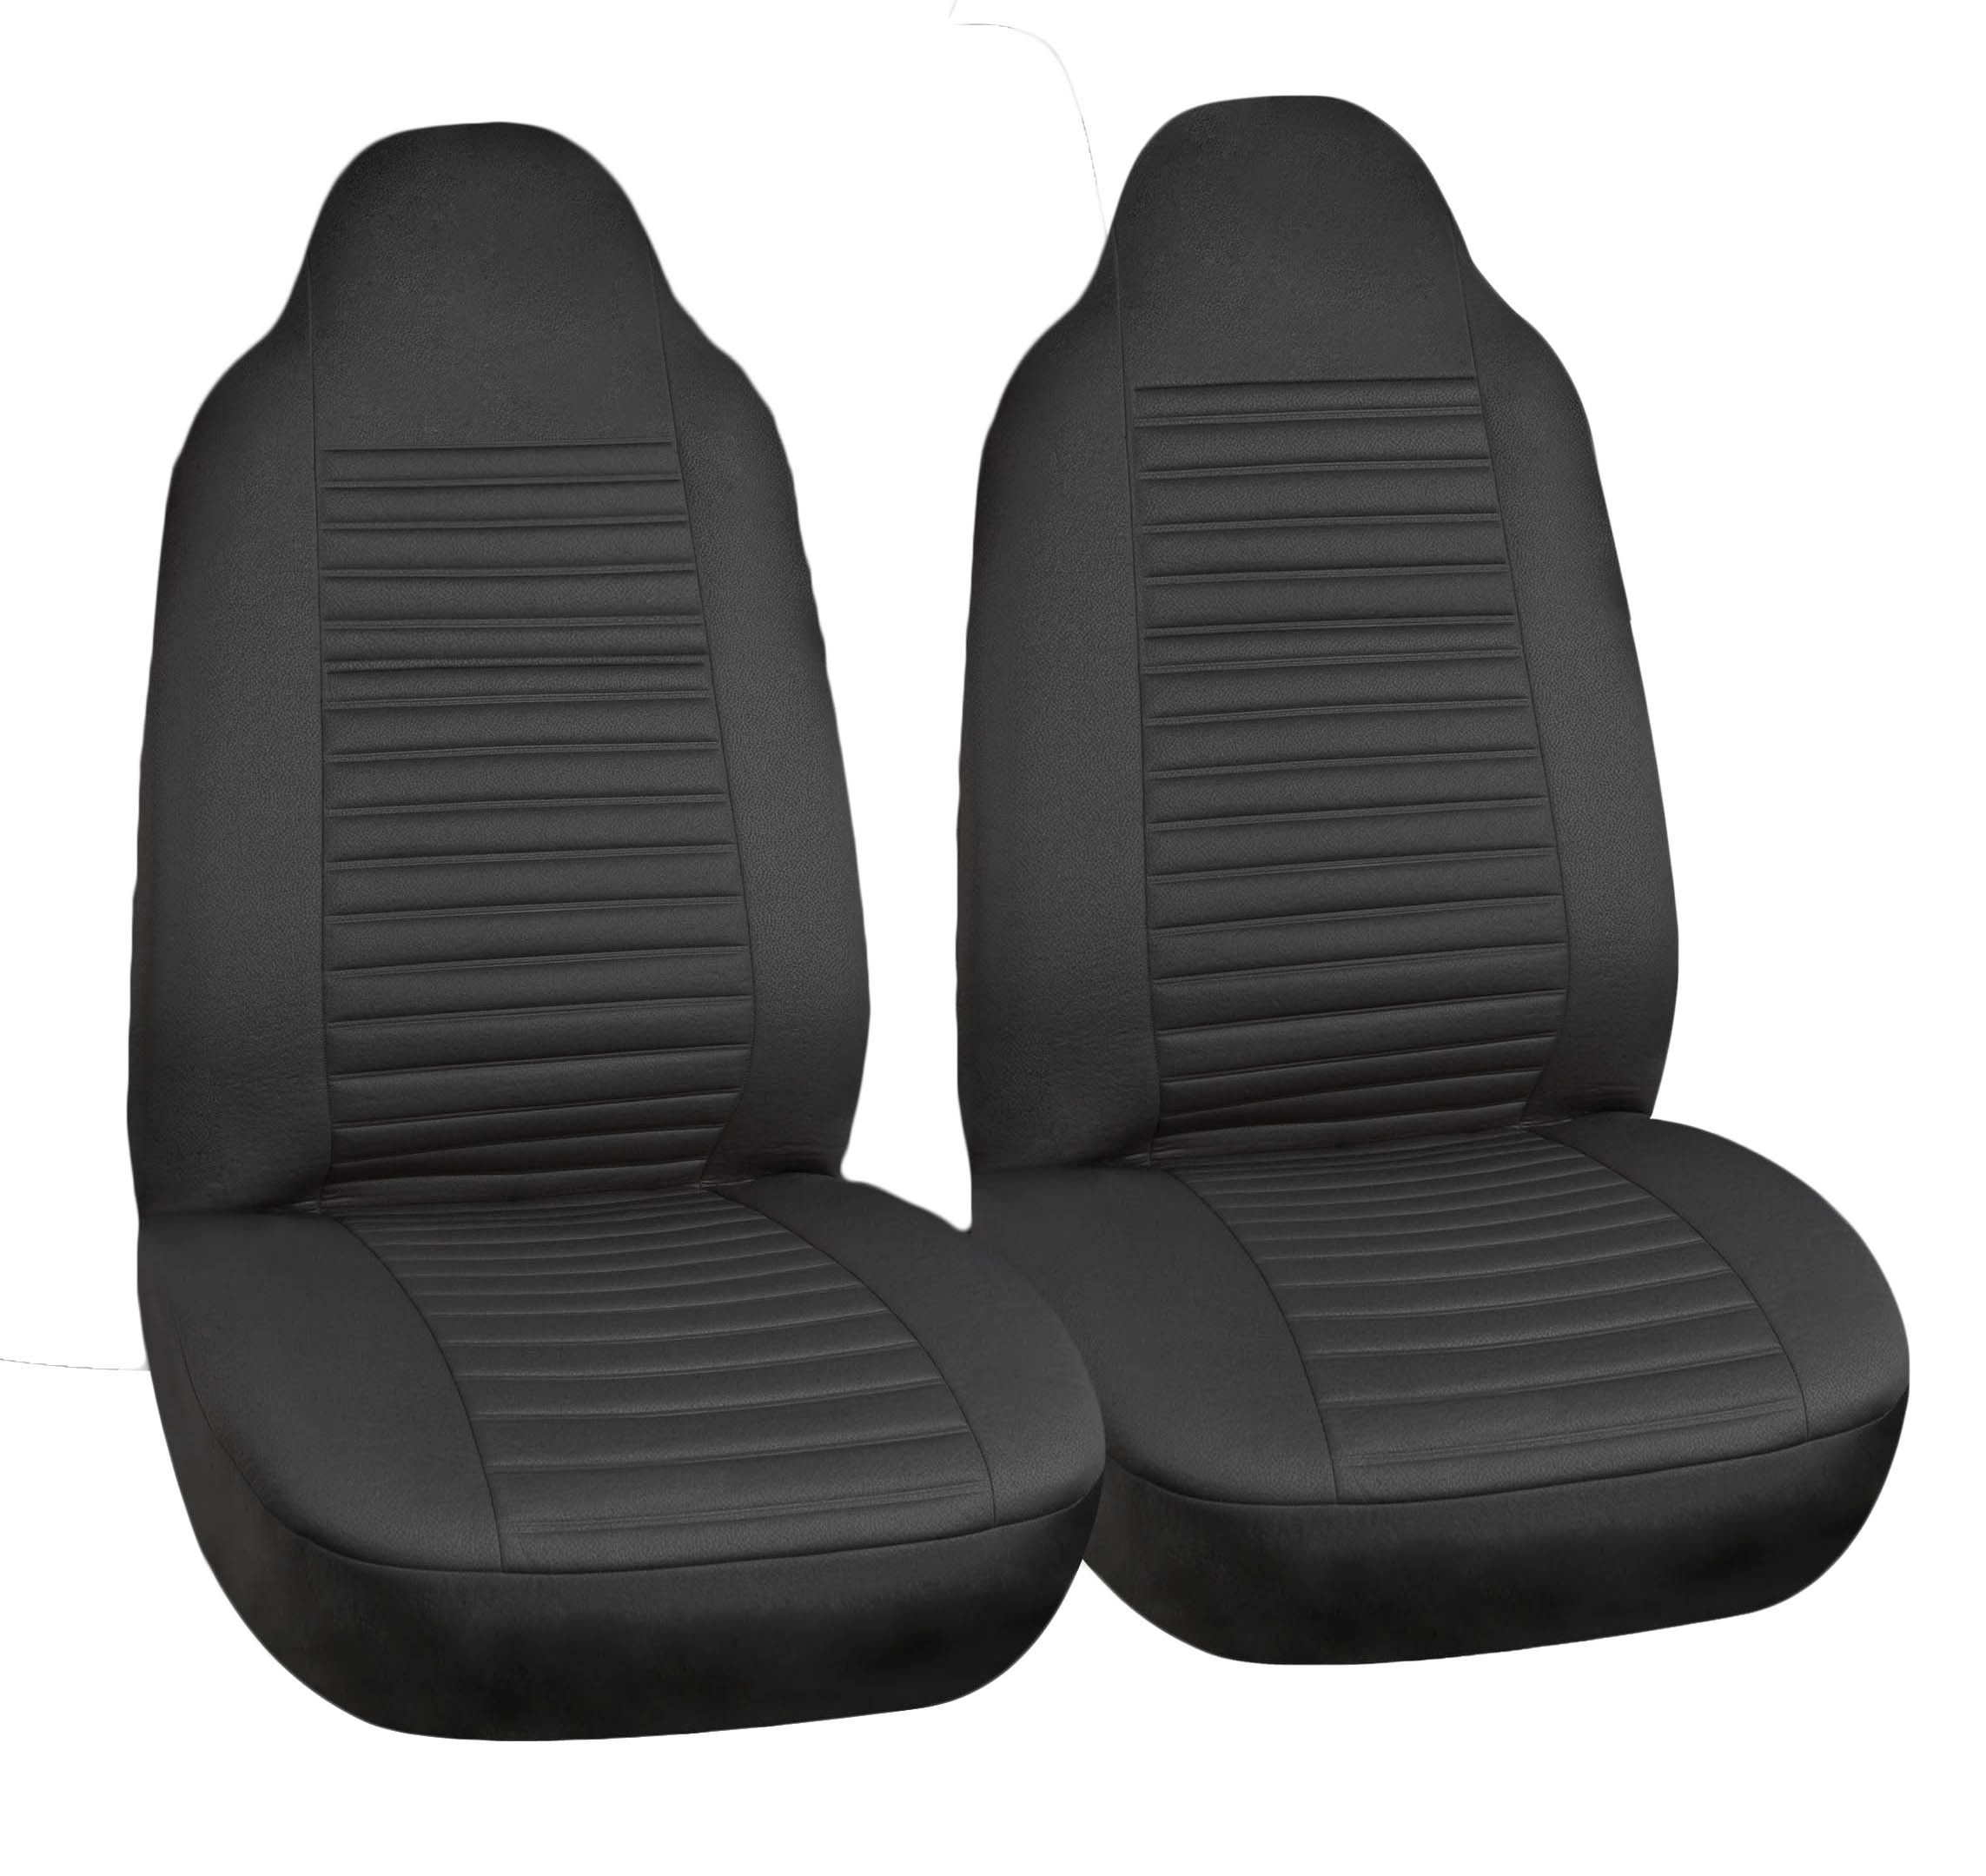 OPULENCE ULTRA LUX SEAT COVER 14 PCS